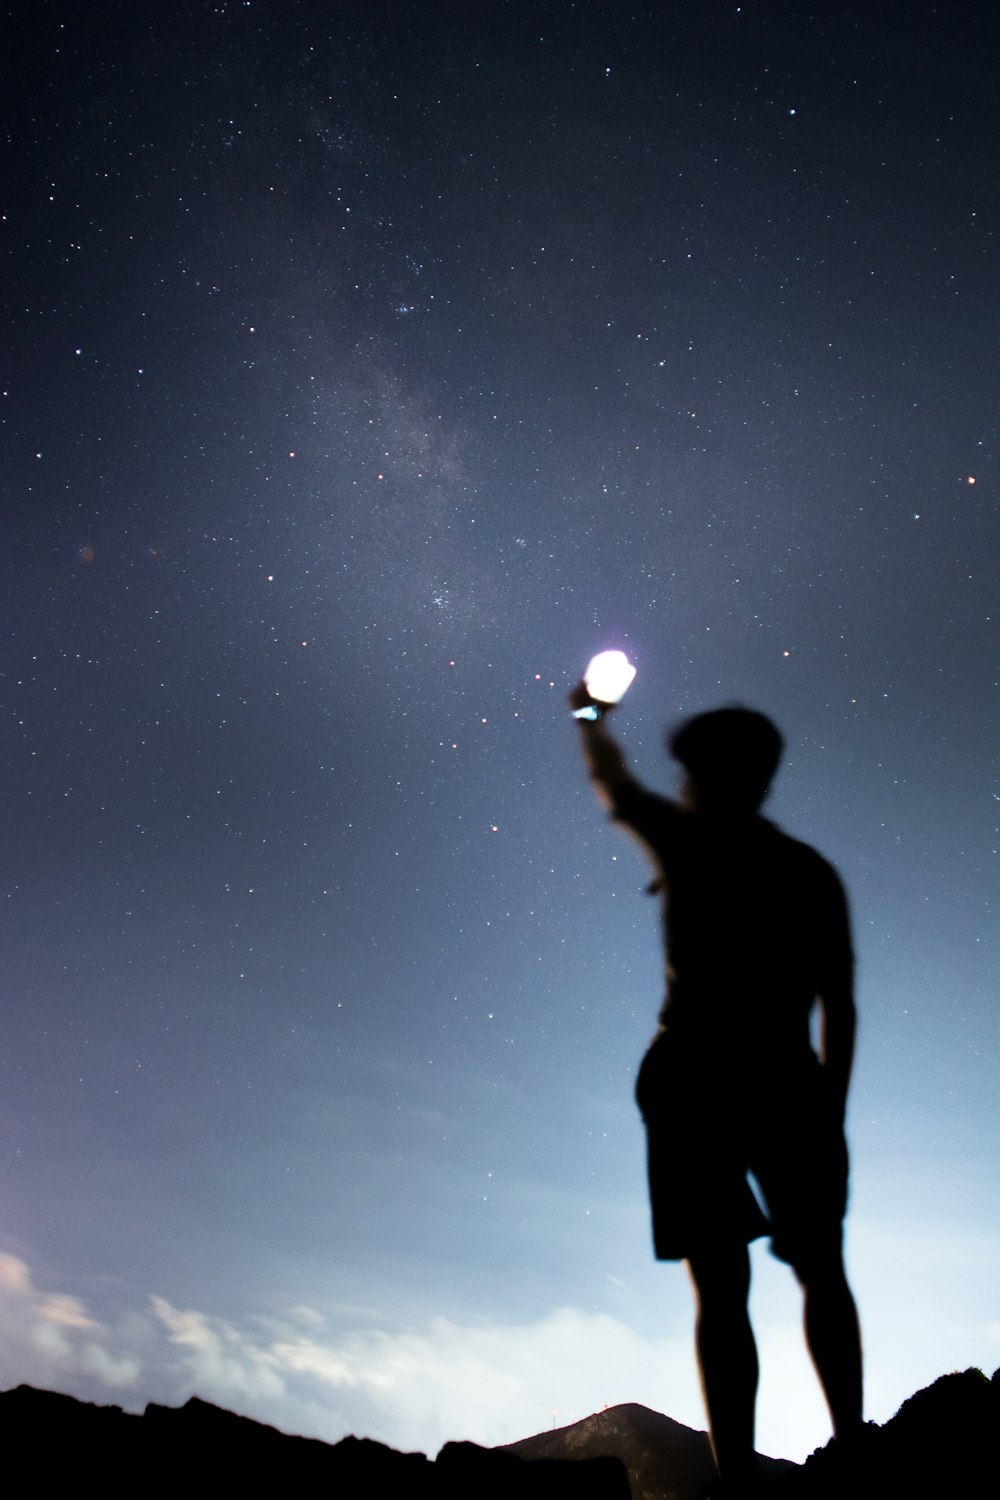 silhouette of man holding lighted light during night time